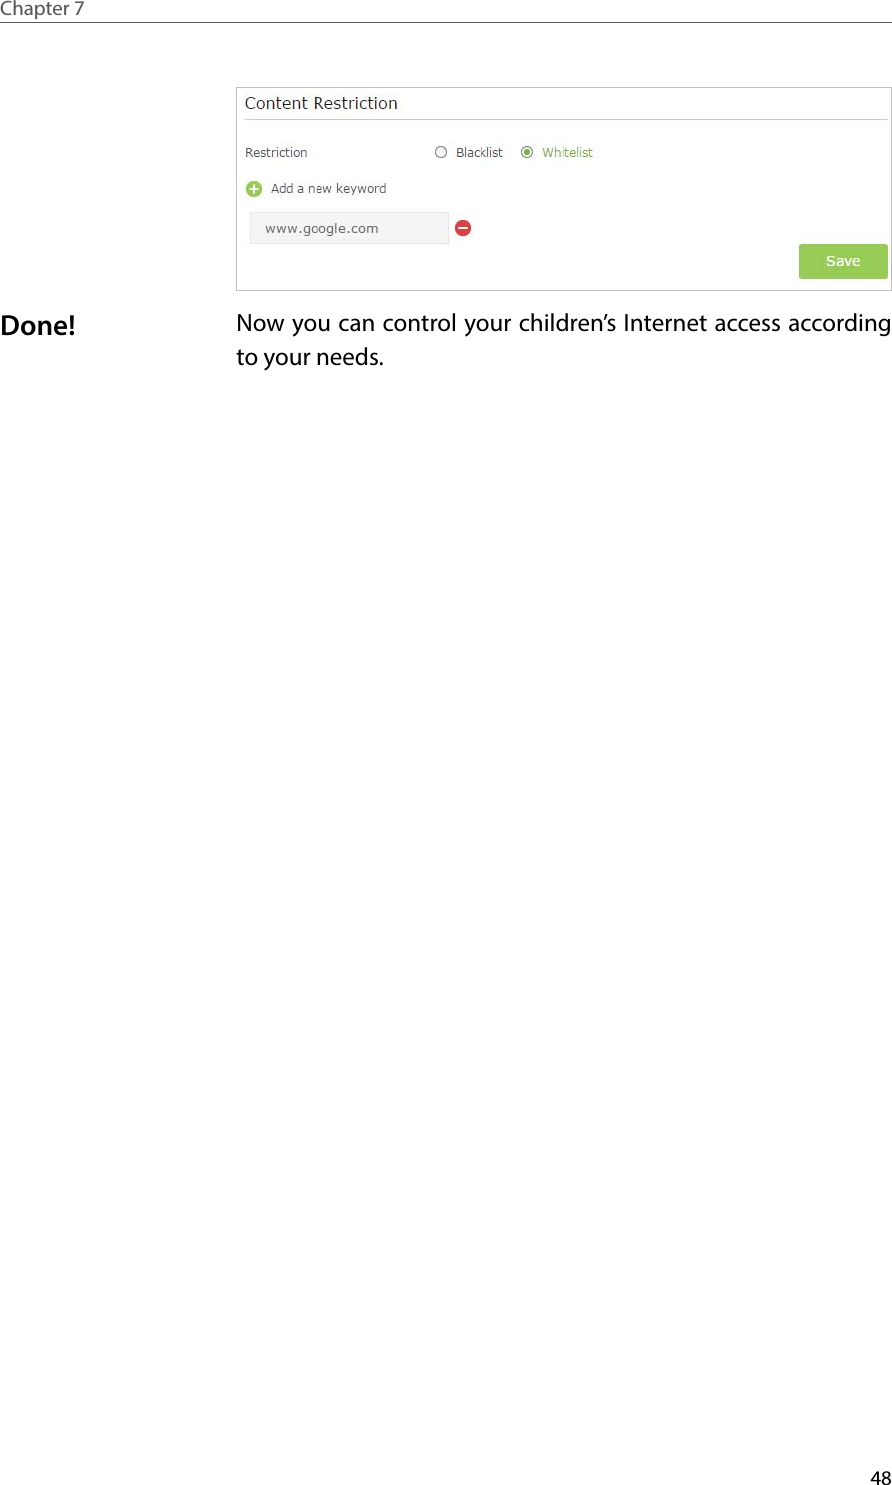 48Chapter 7  Now you can control your children’s Internet access according to your needs.Done!